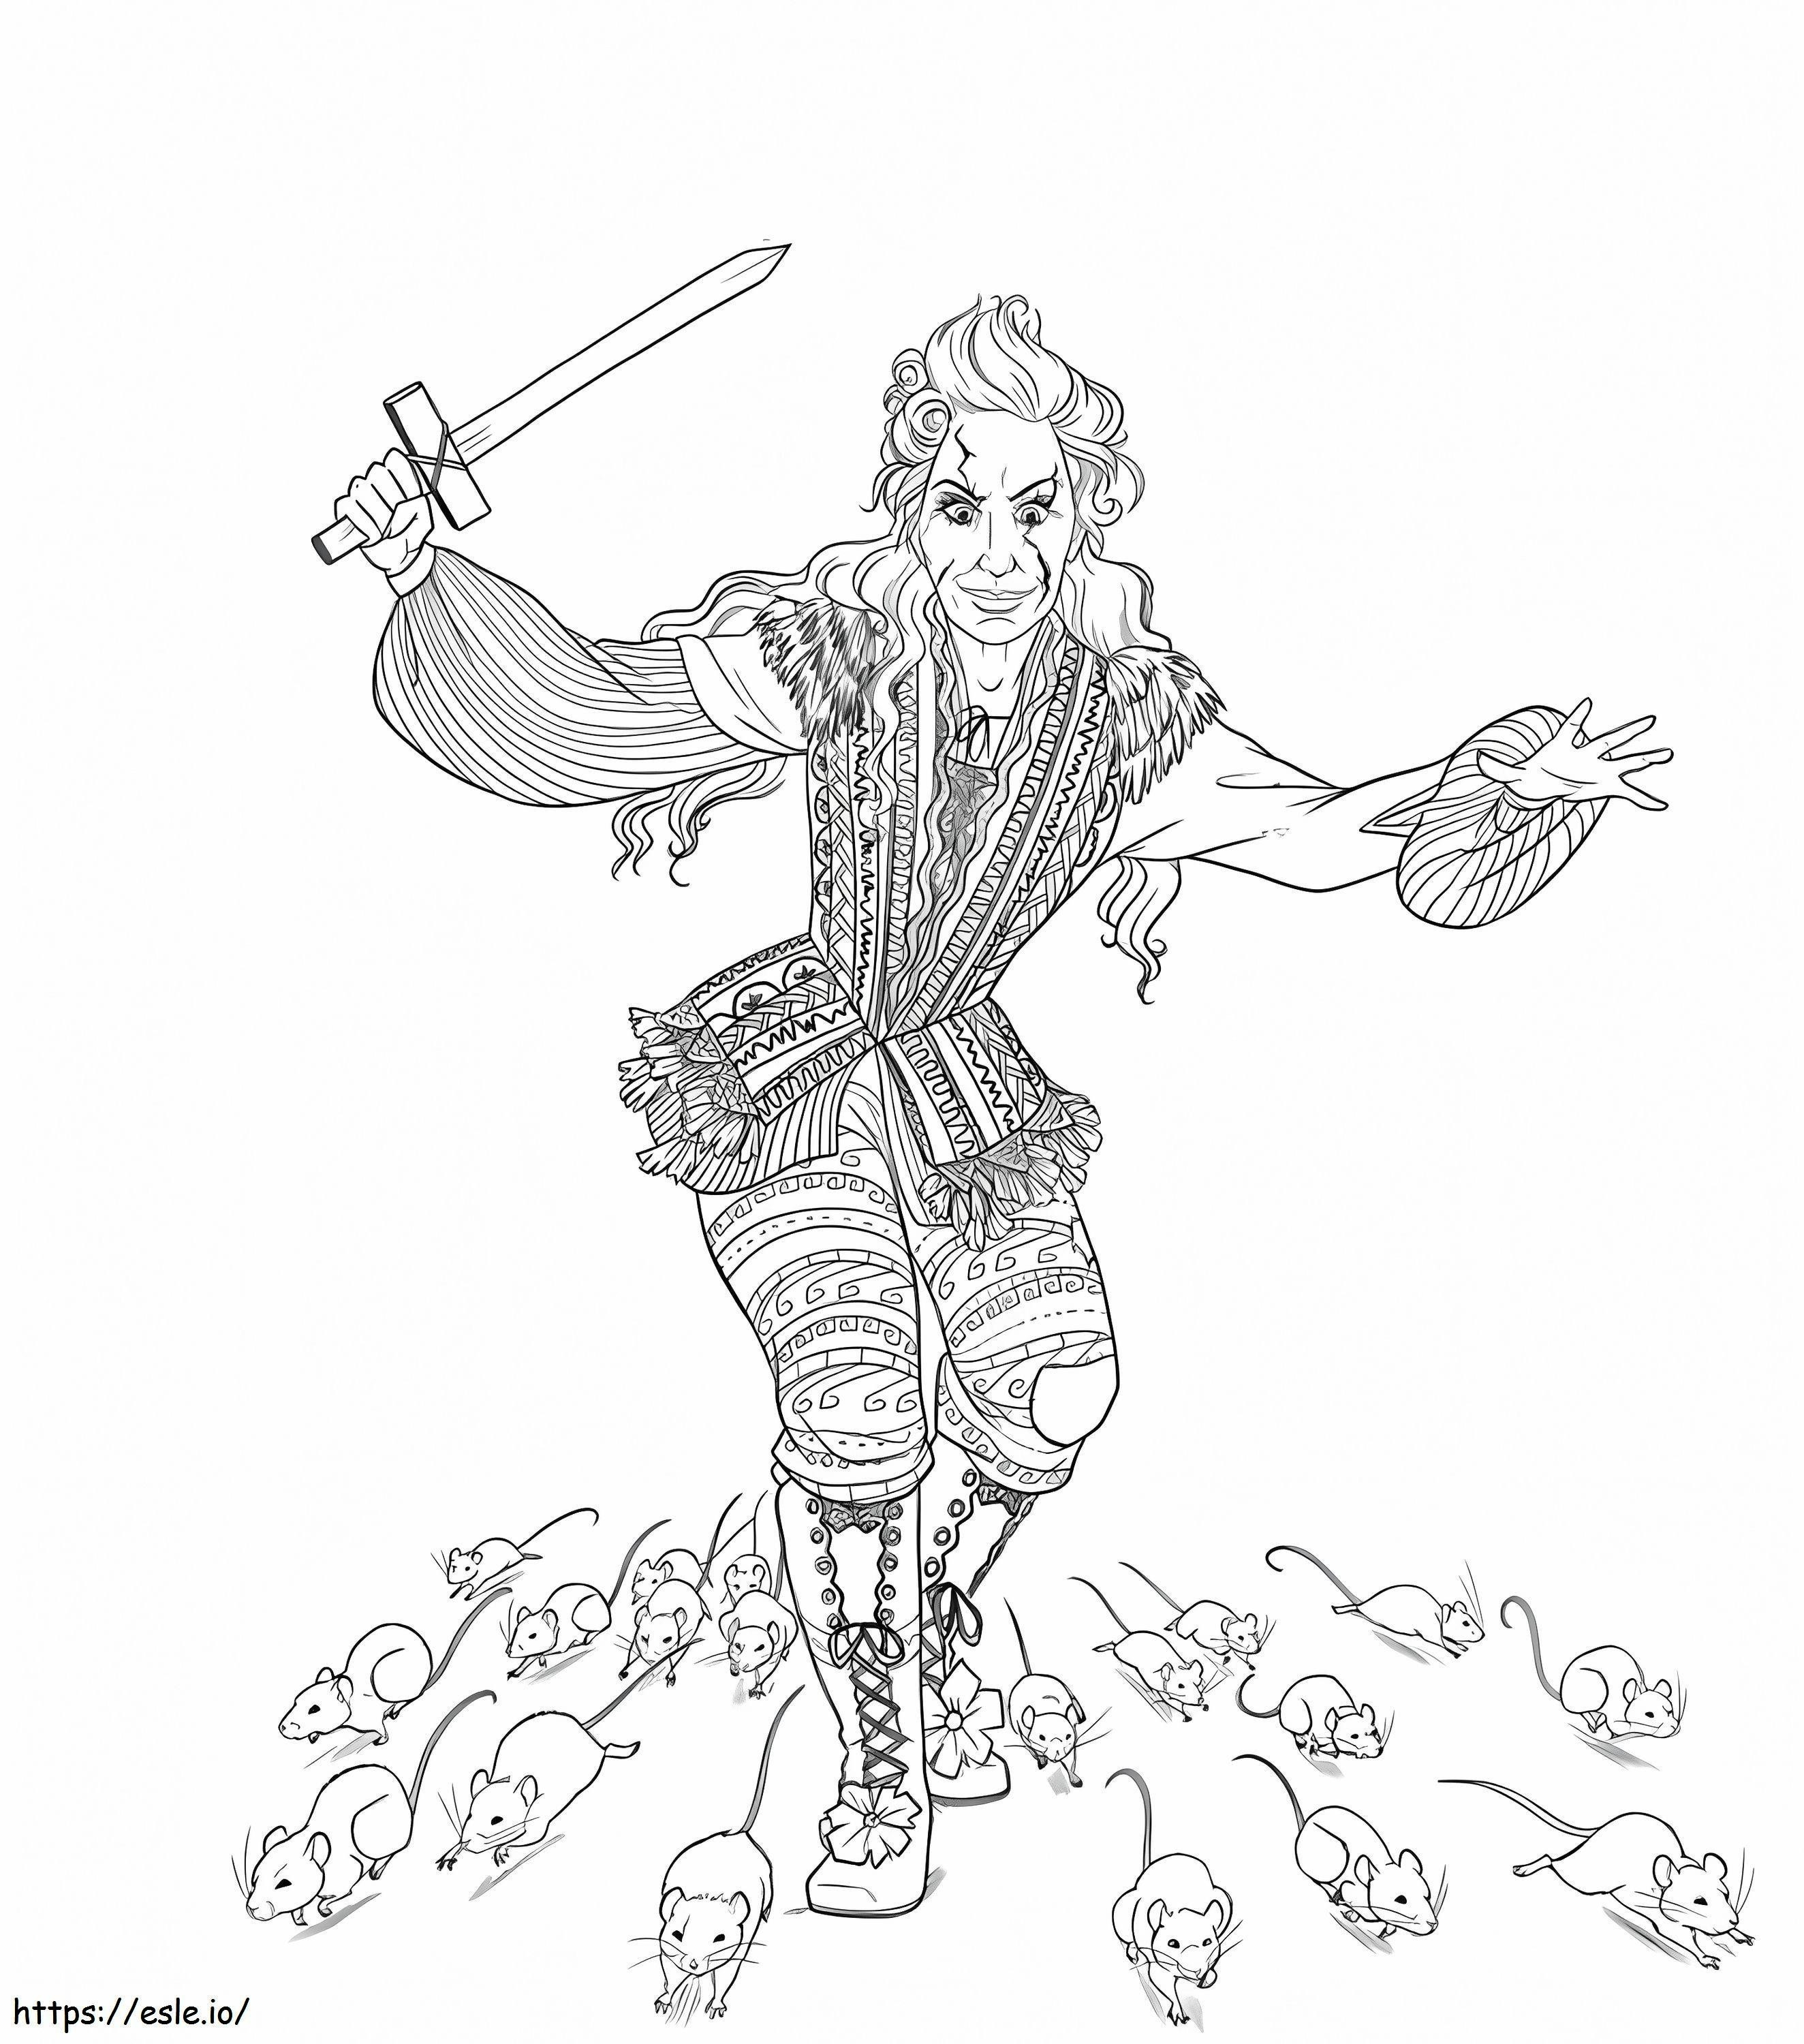 1562205147_Mother Ginger A4 coloring page